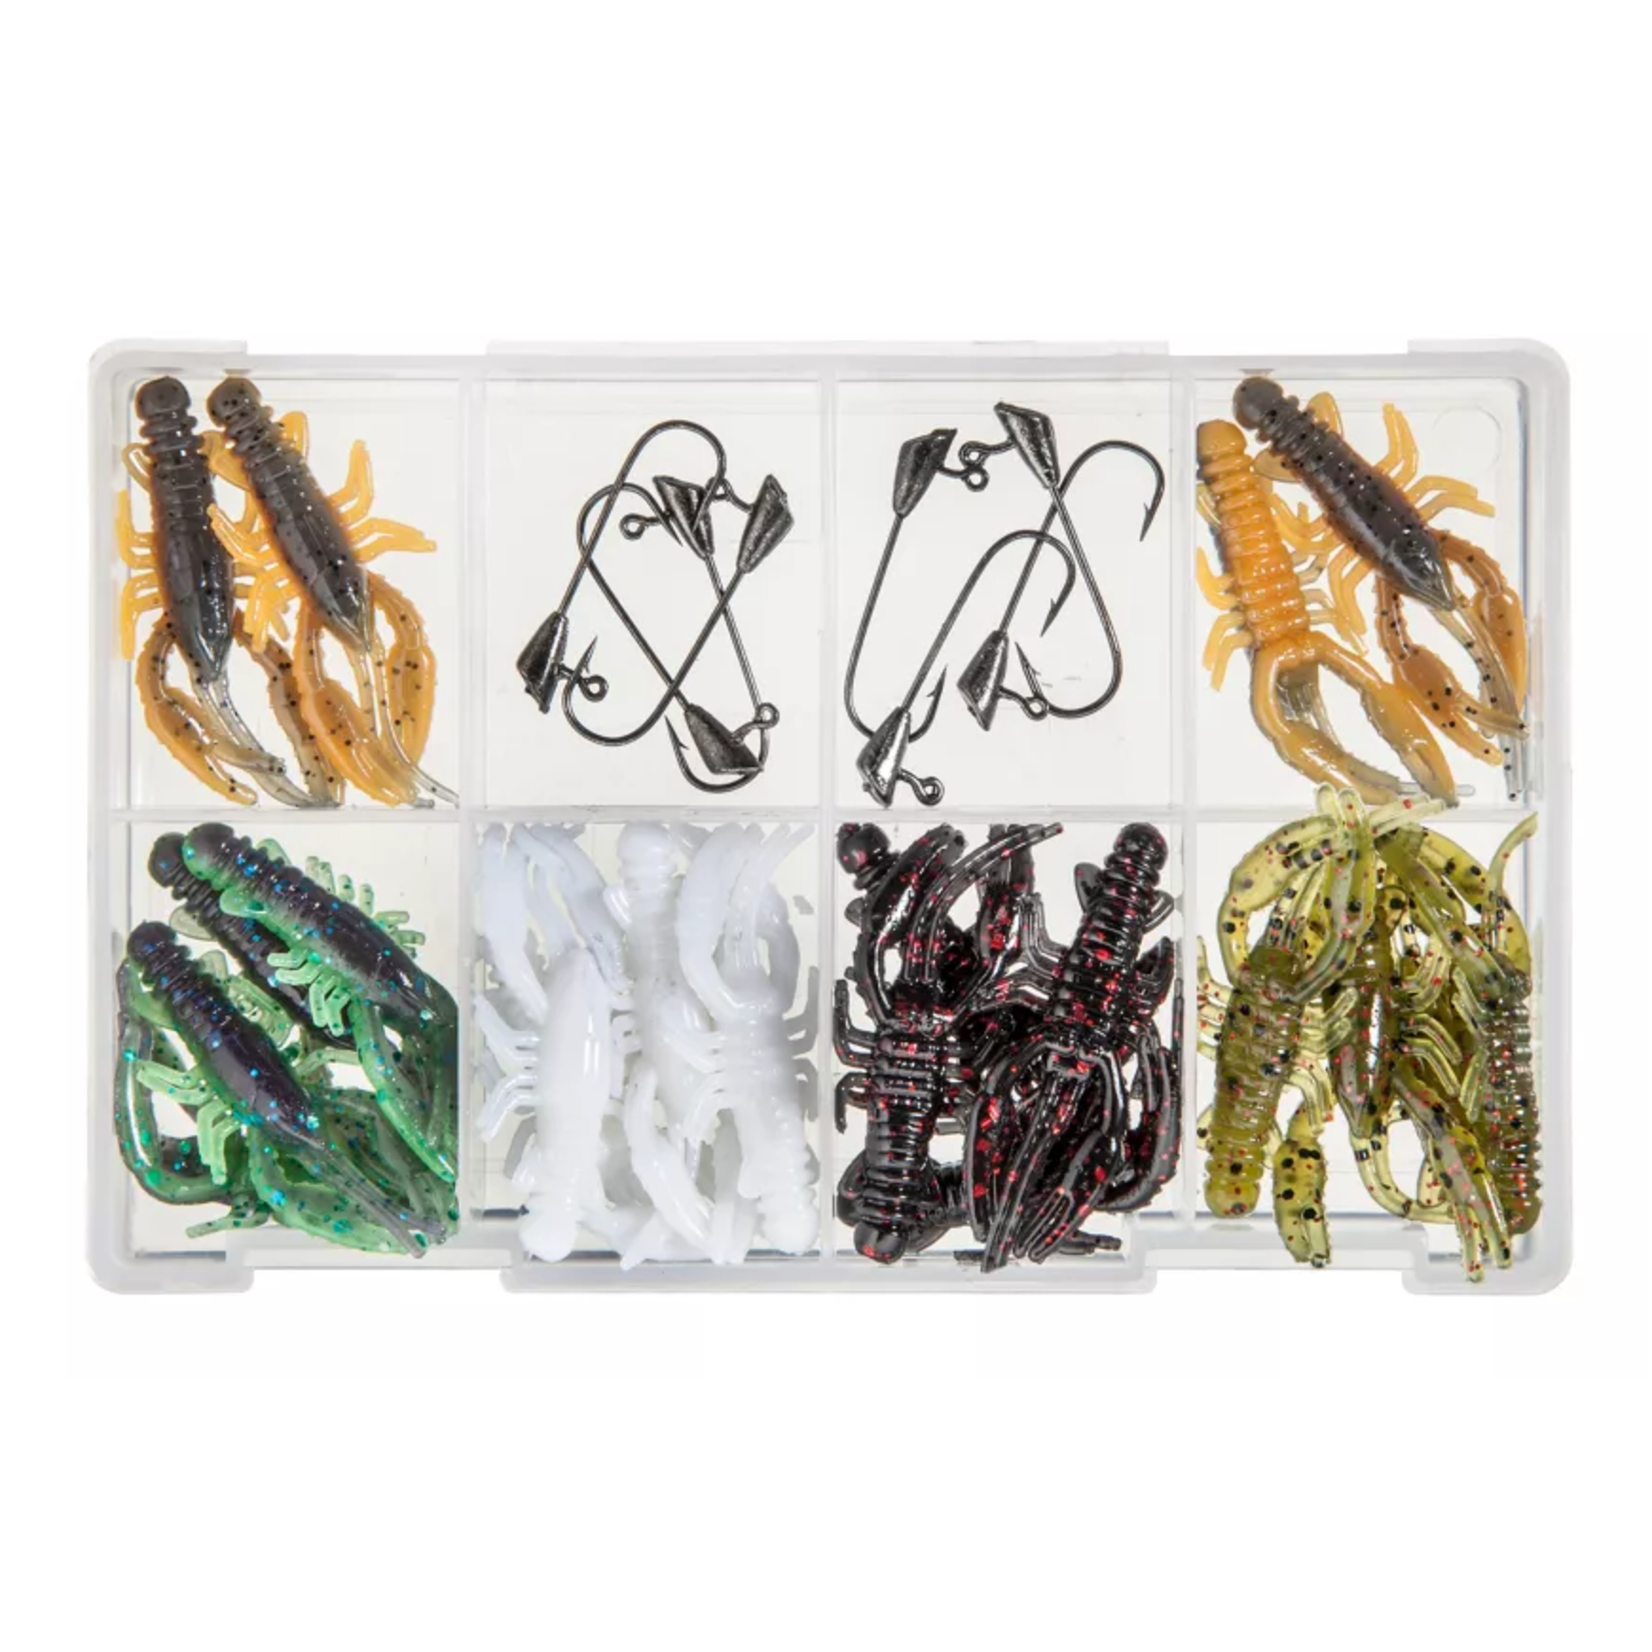 Leland's Lures LELAND'S LURES - TROUT SLAYER KIT - 28PC (20 BODIES & 8 JIG HEADS)